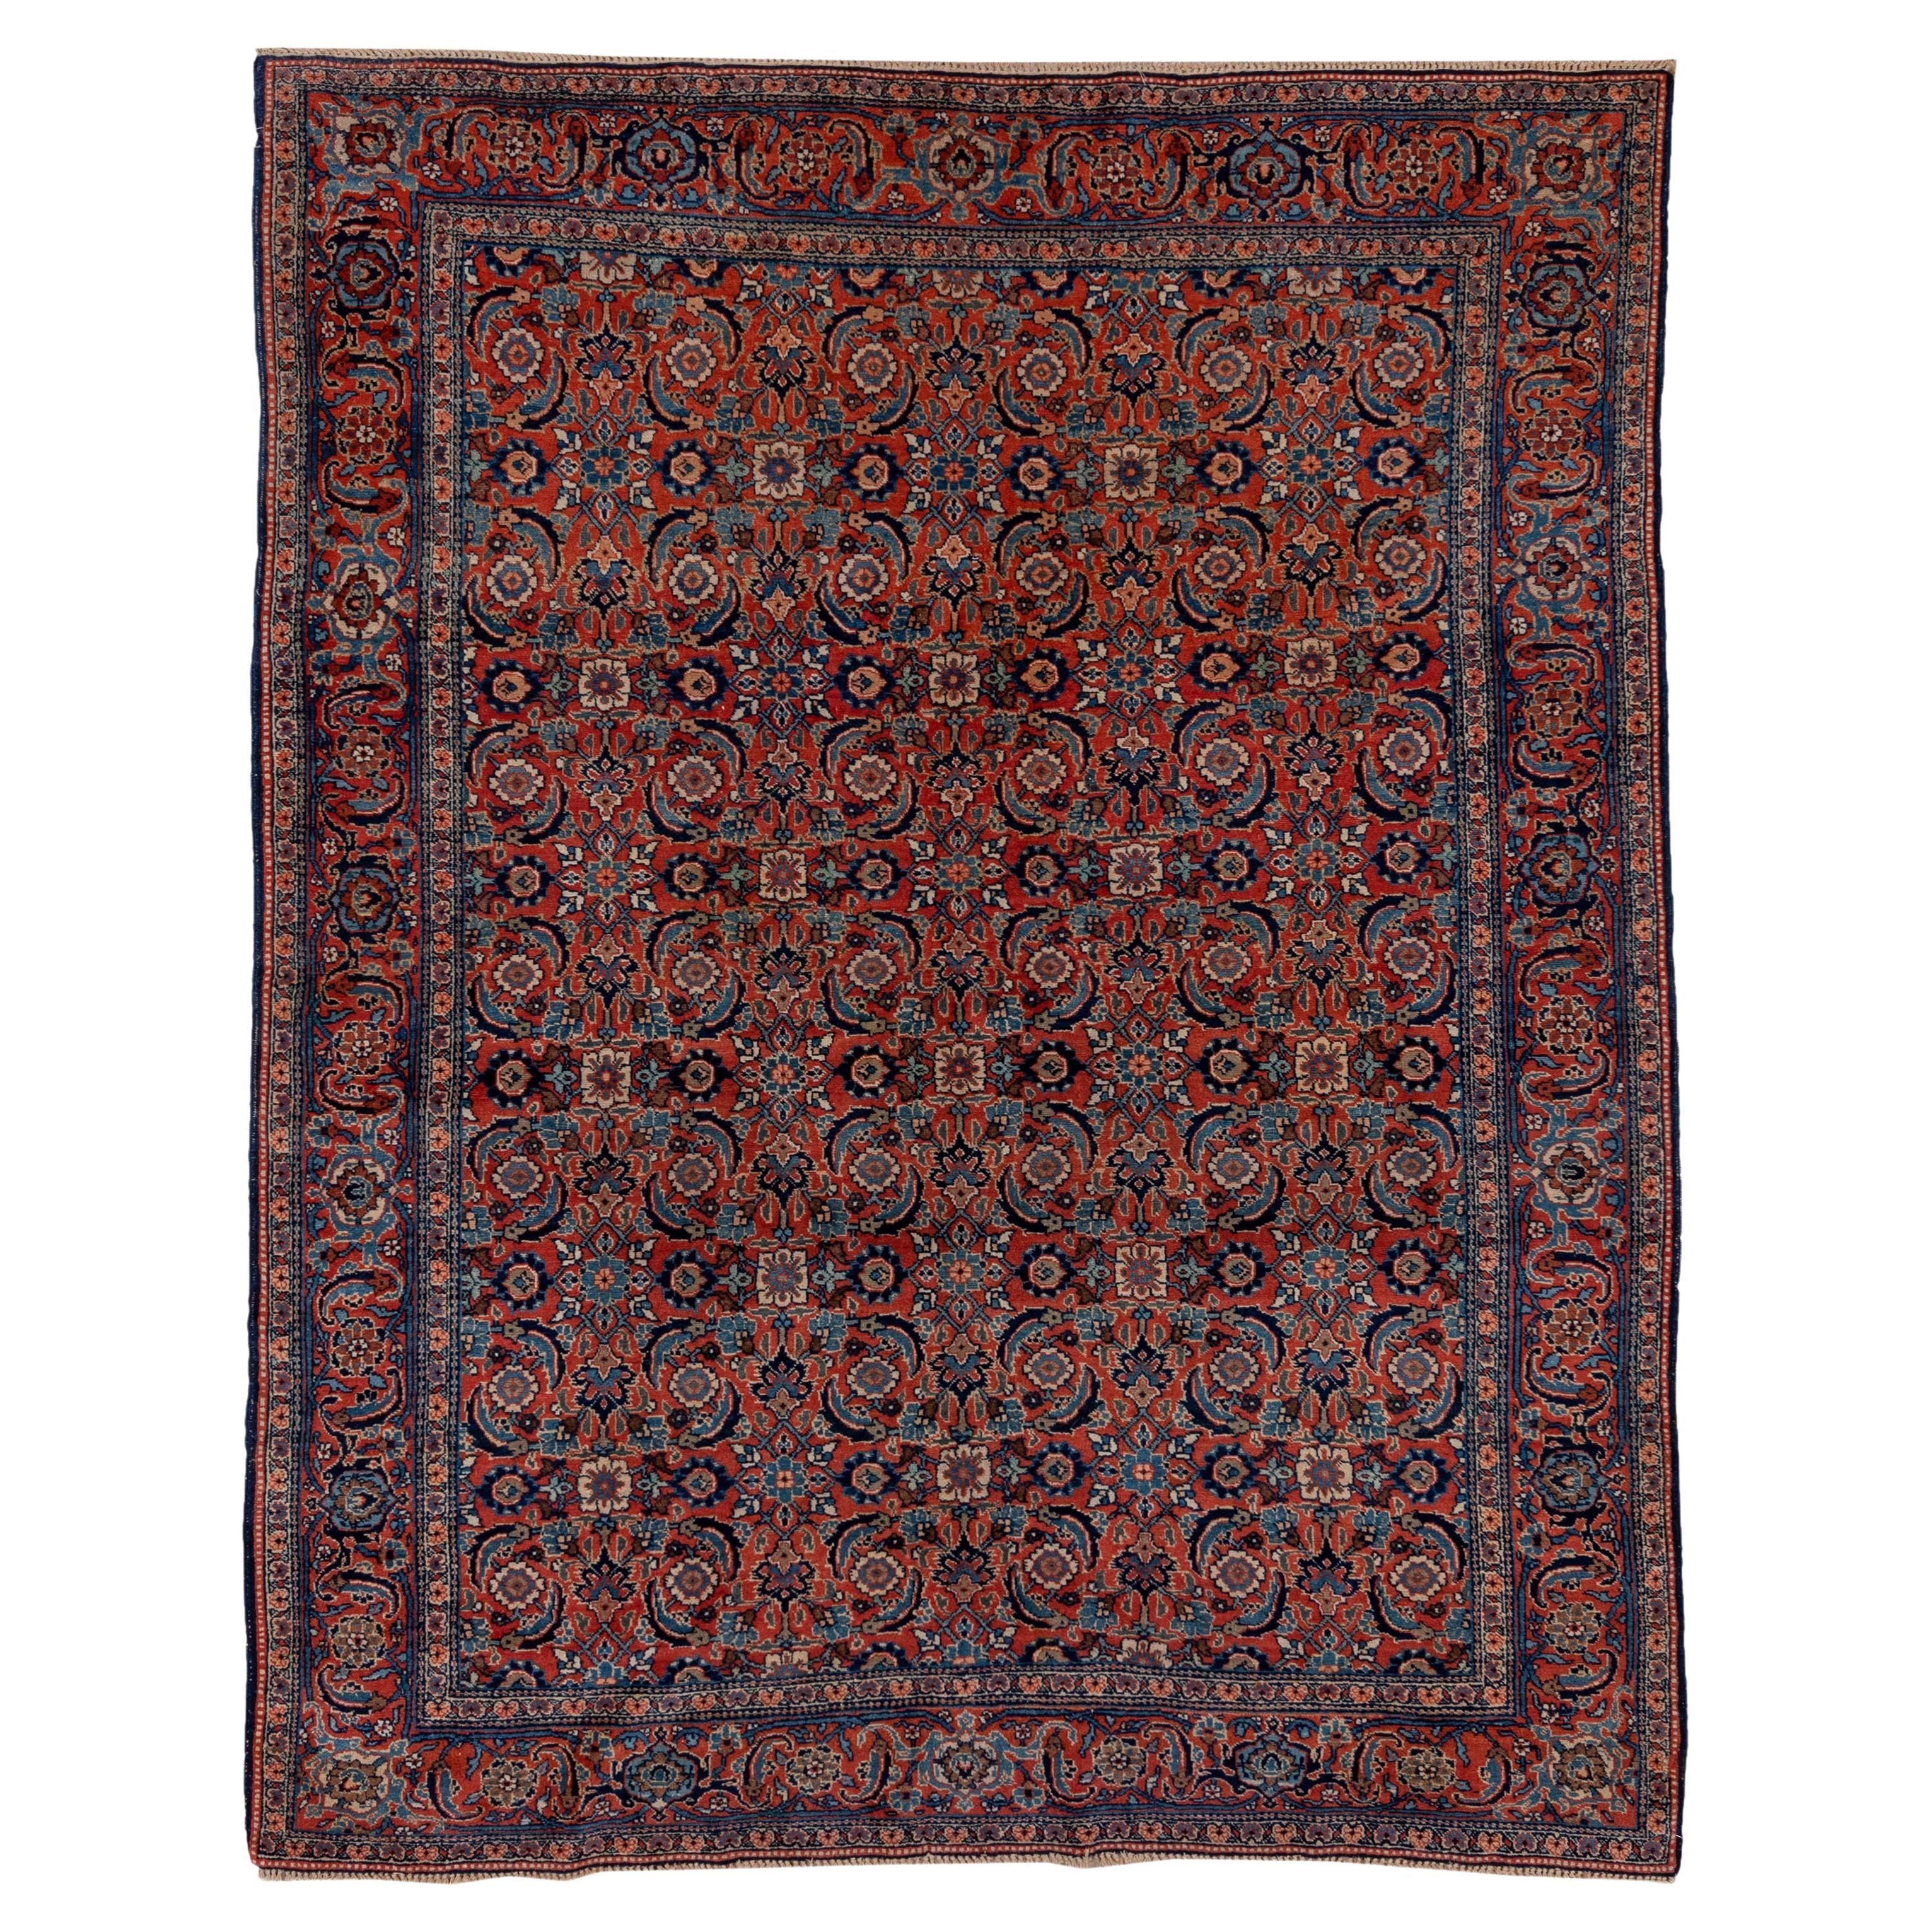 Bright Antique Persian Tabriz Carpet, All-Over Field, Red and Blue Tones, 1910s